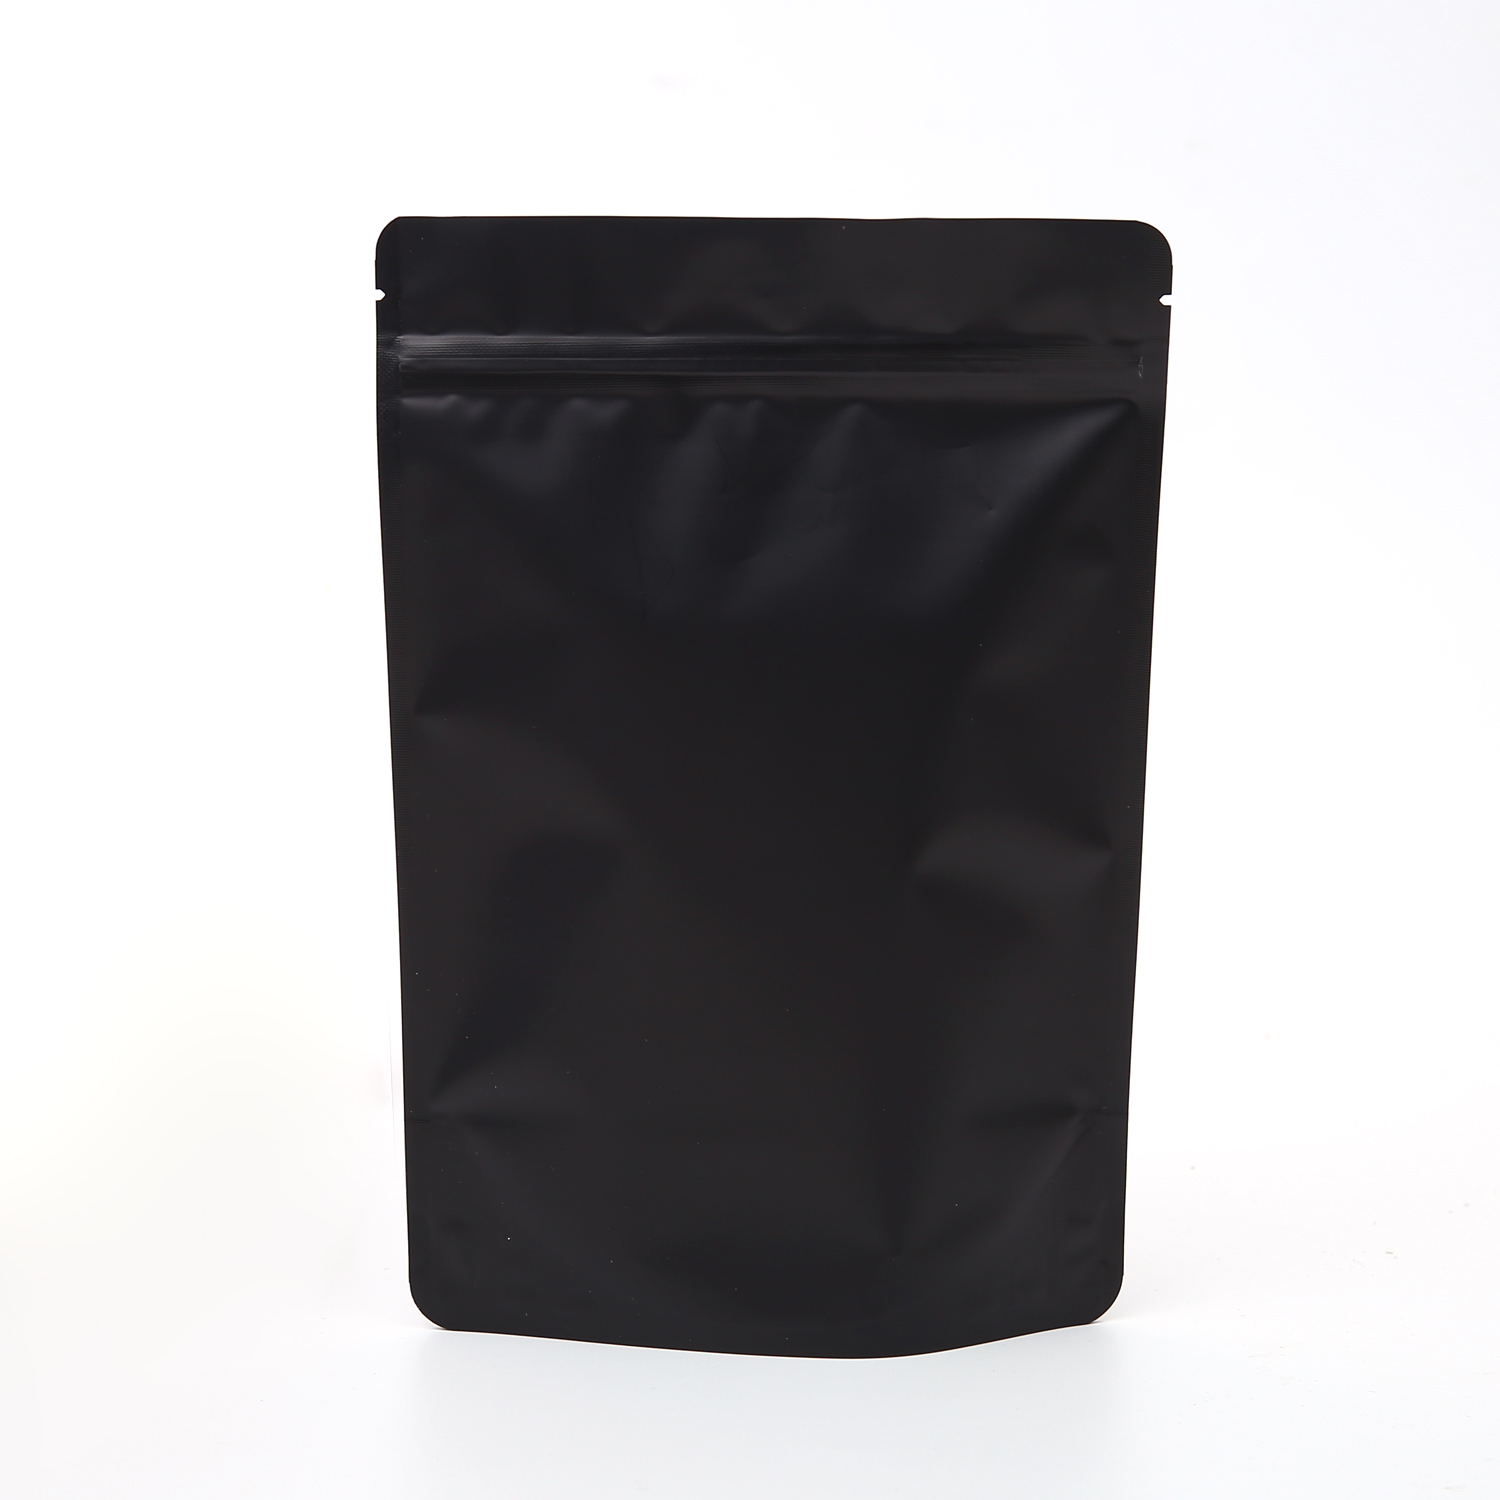 Thickness 26C Reclosable Matte Black White Zip Lock Packaging Bags Aluminum Foil Plastic Food Stand Up Pouch with Zipper 50pcs